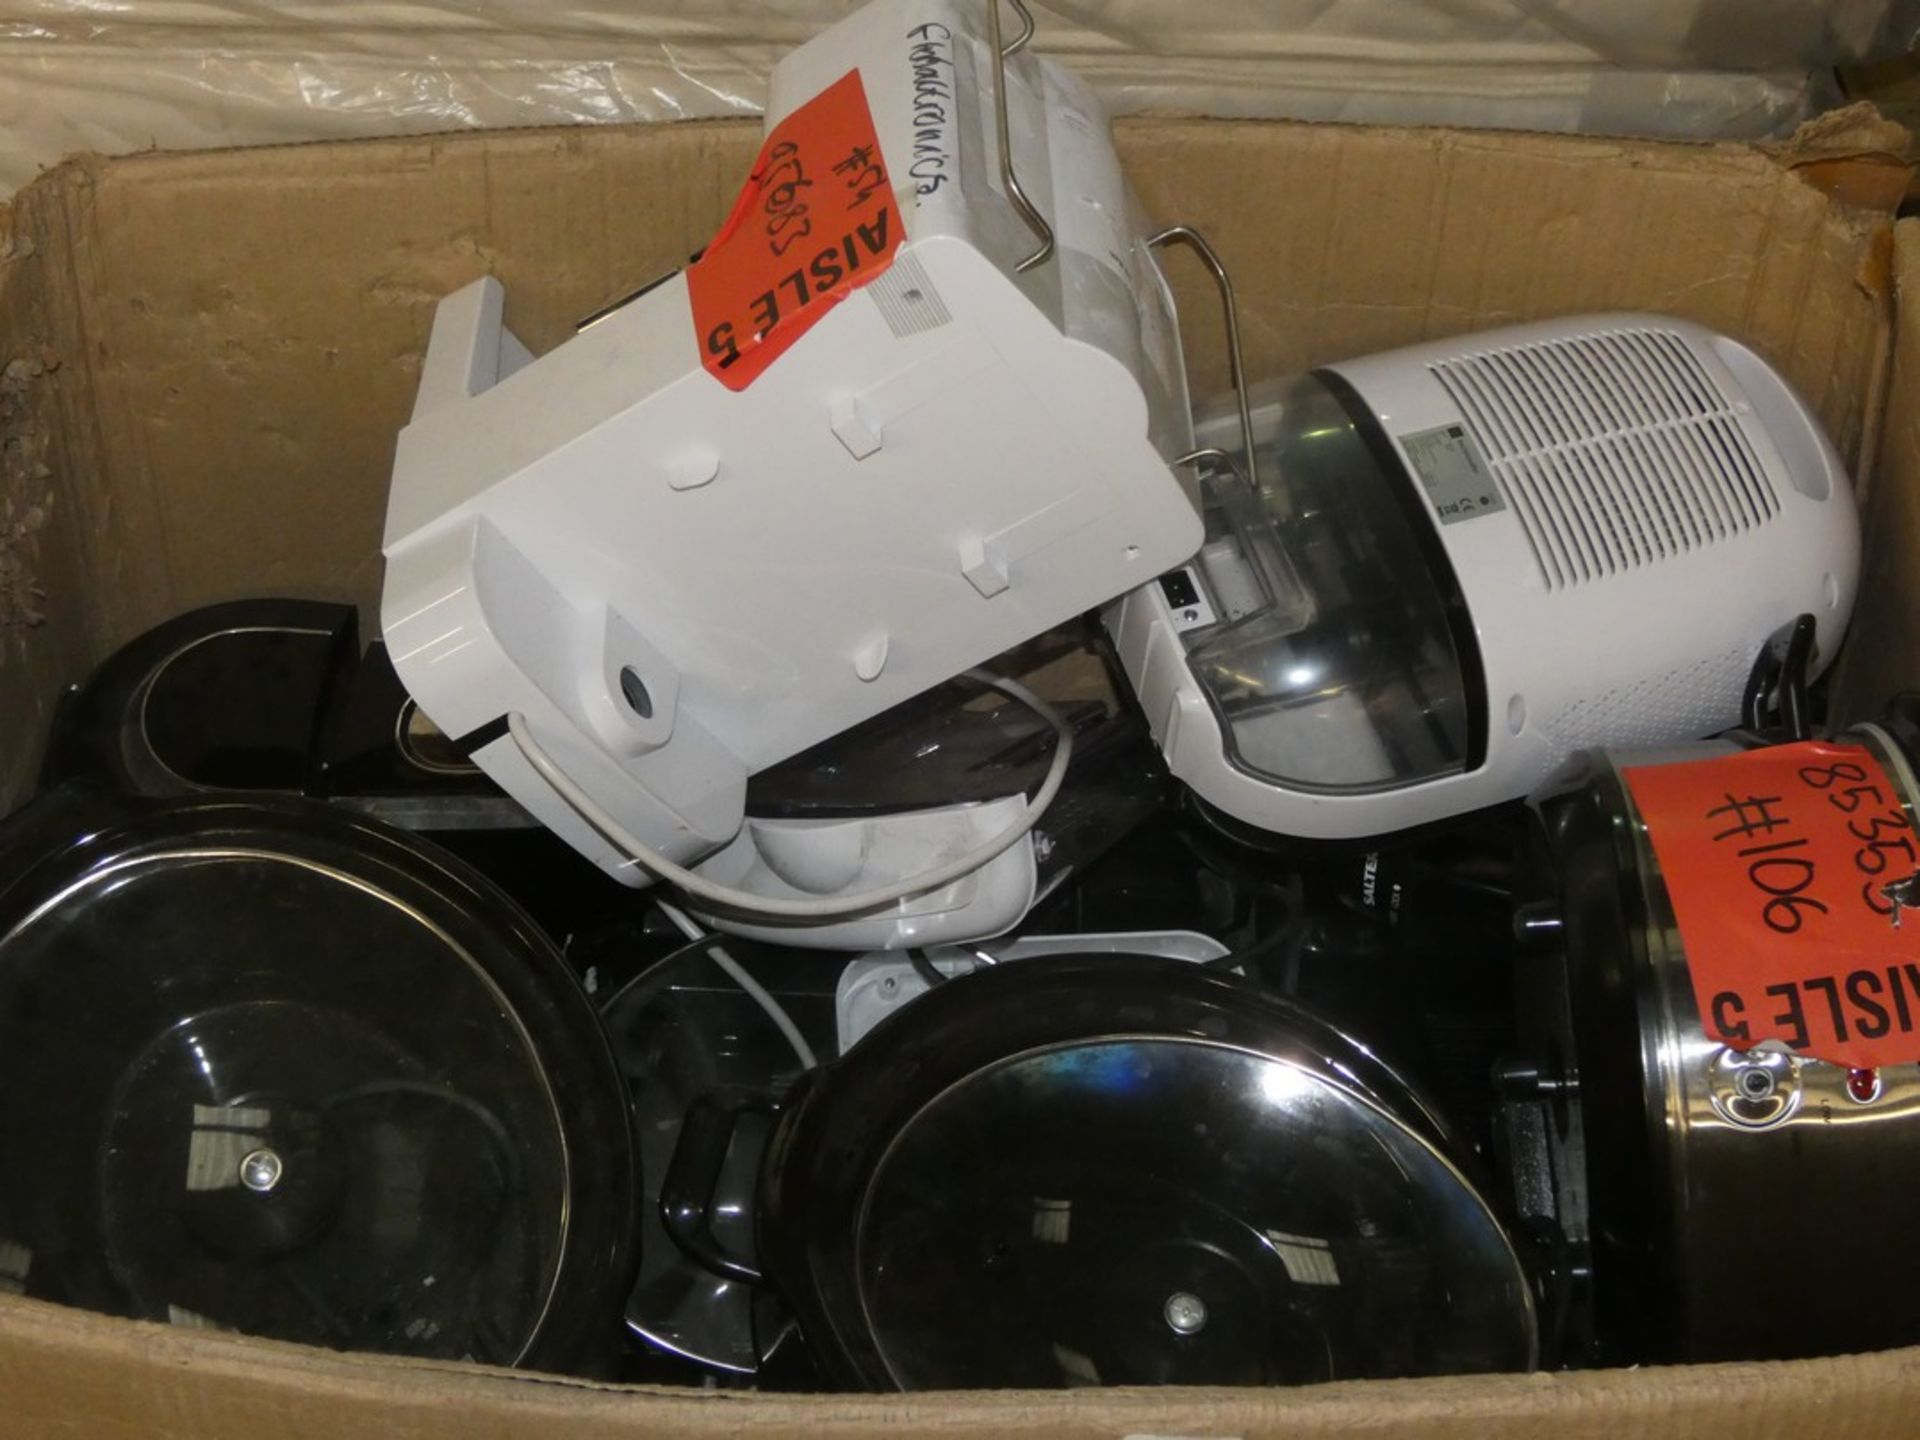 Lot to Contain 7 Assorted Kitchen Items to Include Dehumidifiers, Slow Cookers, Single Coffee